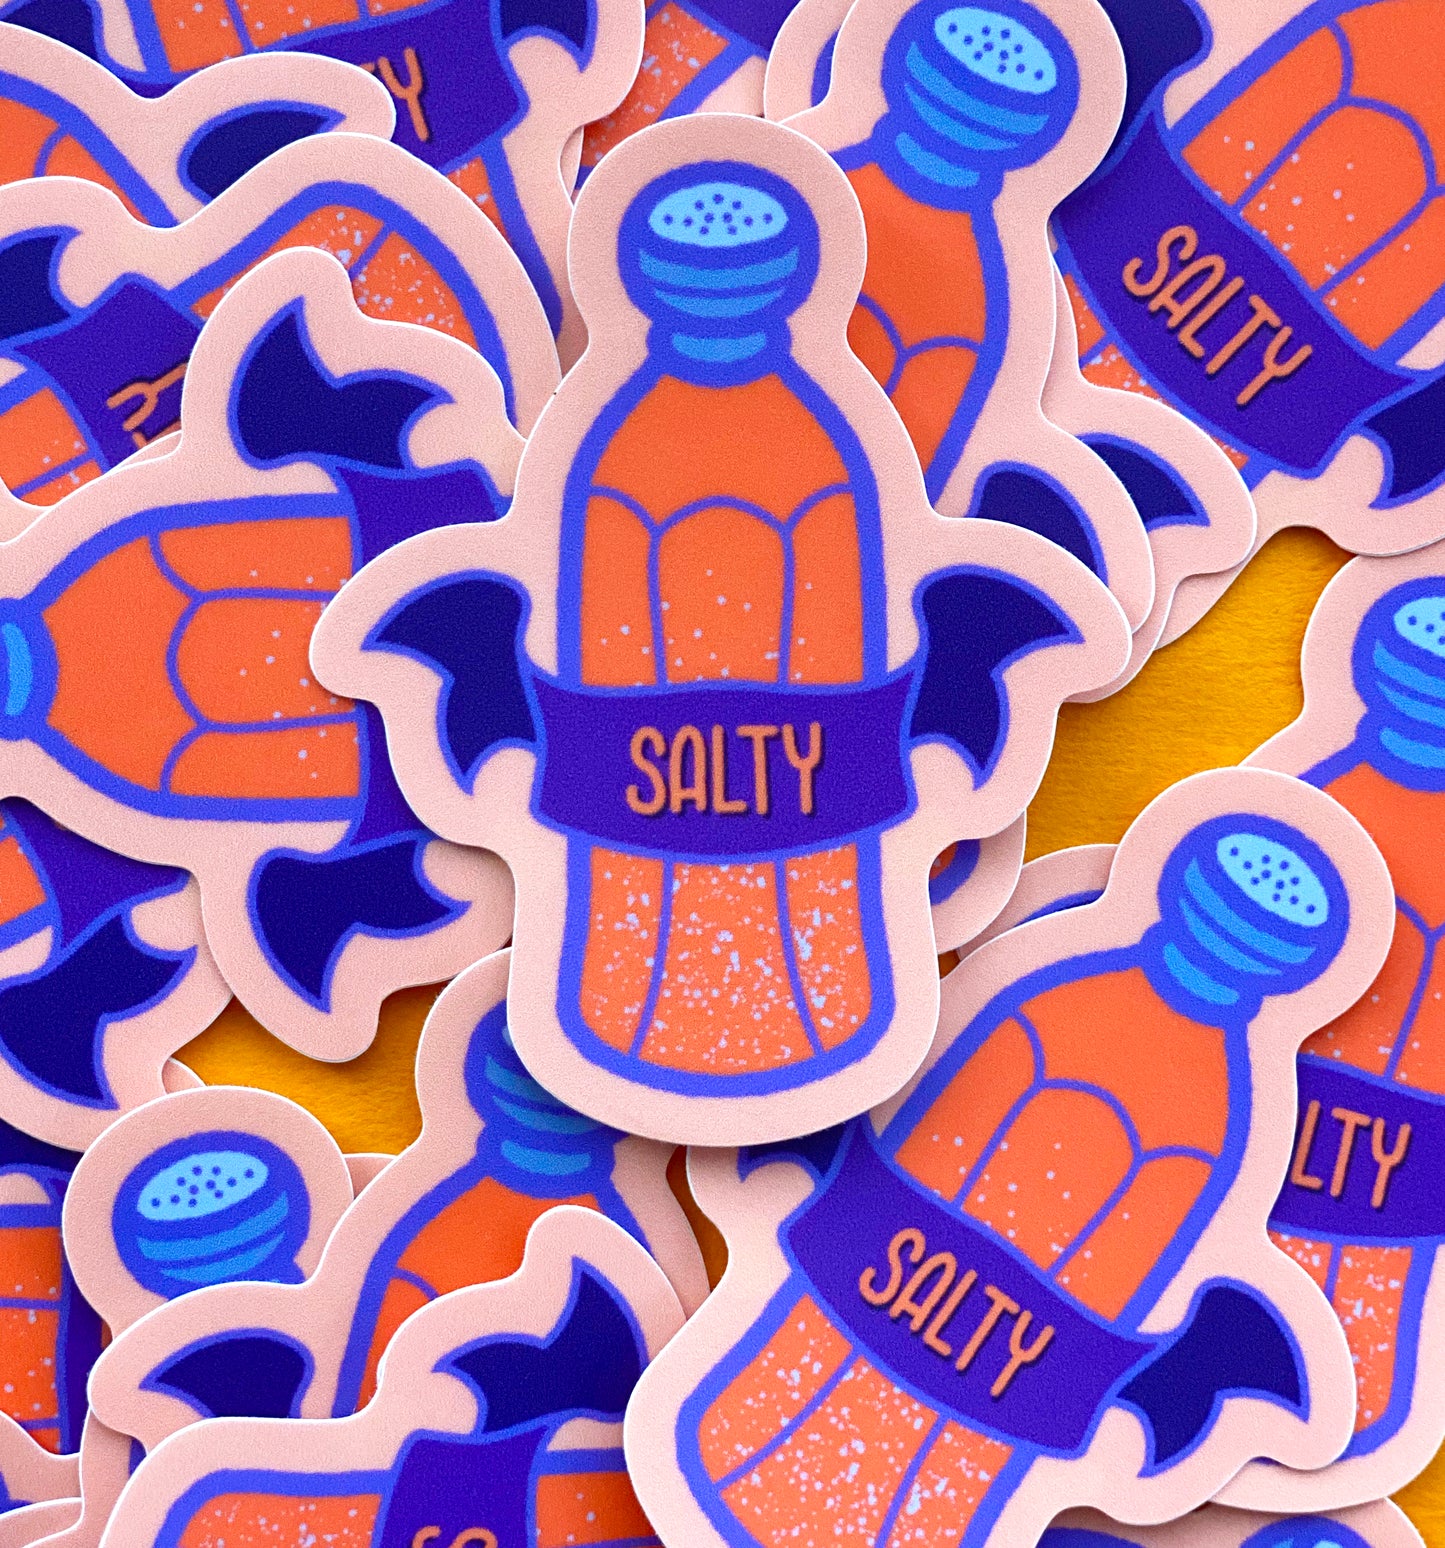 A pile of peach vinyl stickers with an illustration of a salt shaker and a banner that says "Salty" against a bright orange background.